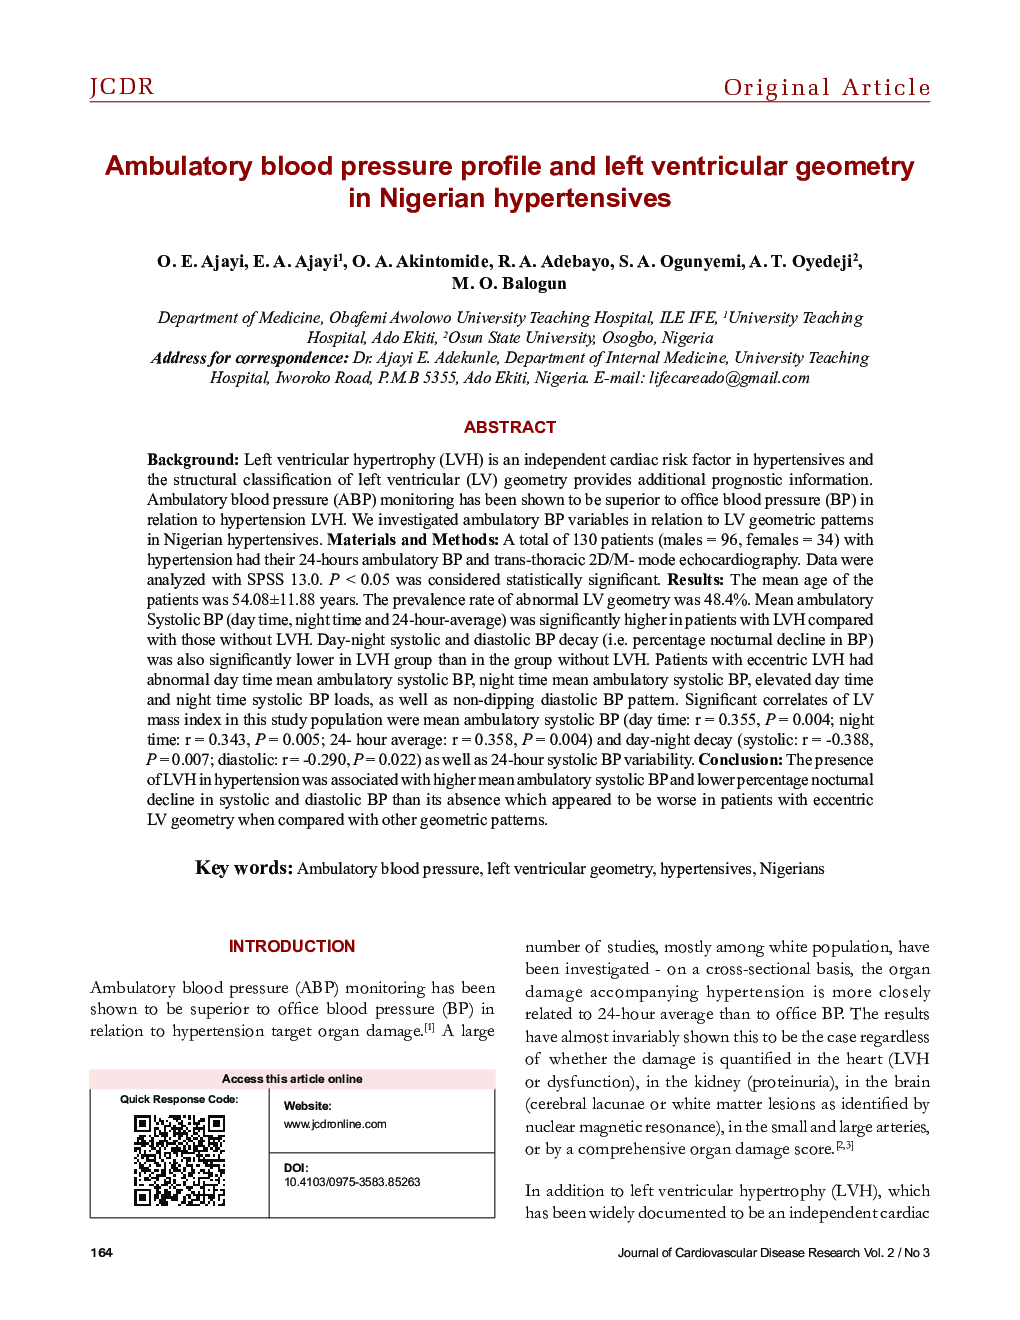 Ambulatory blood pressure profile and left ventricular geometry in Nigerian hypertensives